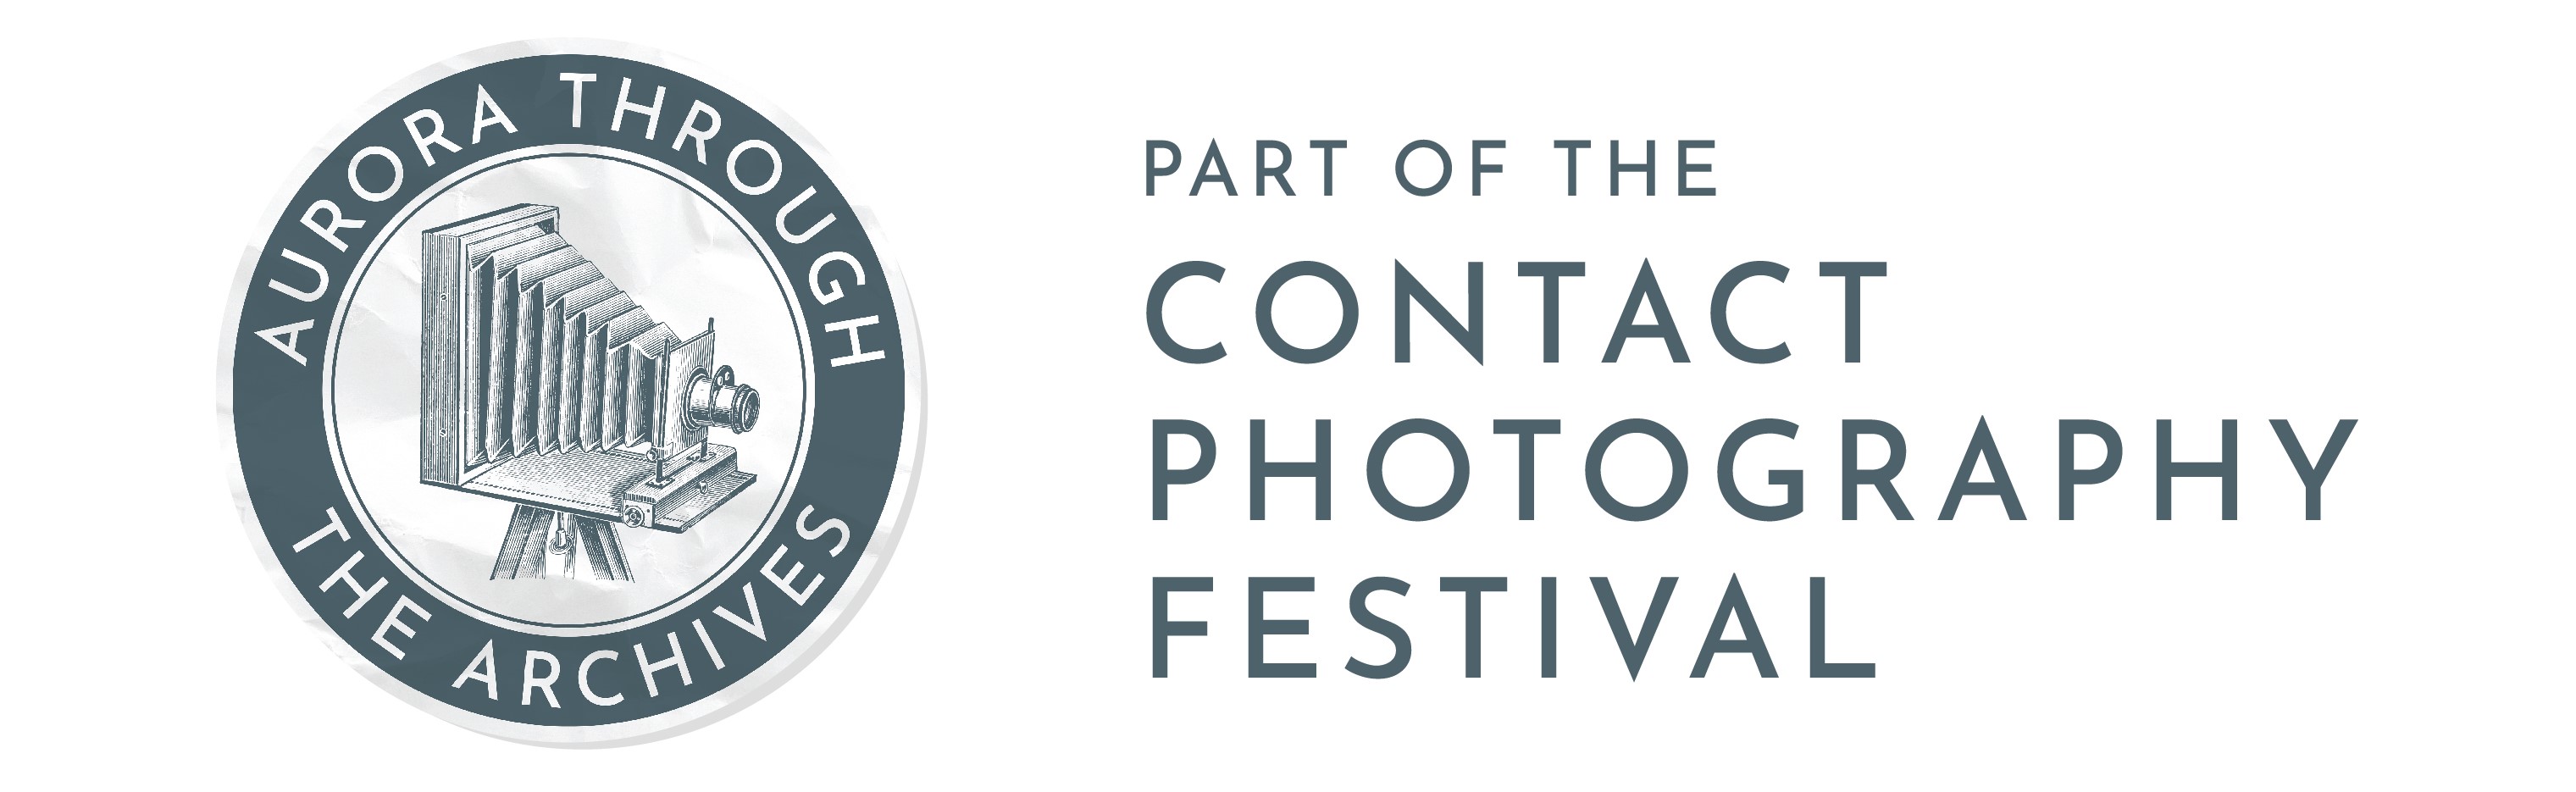 Colour graphic of Aurora Through the Archives Logo and text that reads "part of the Contact Photography Festival"